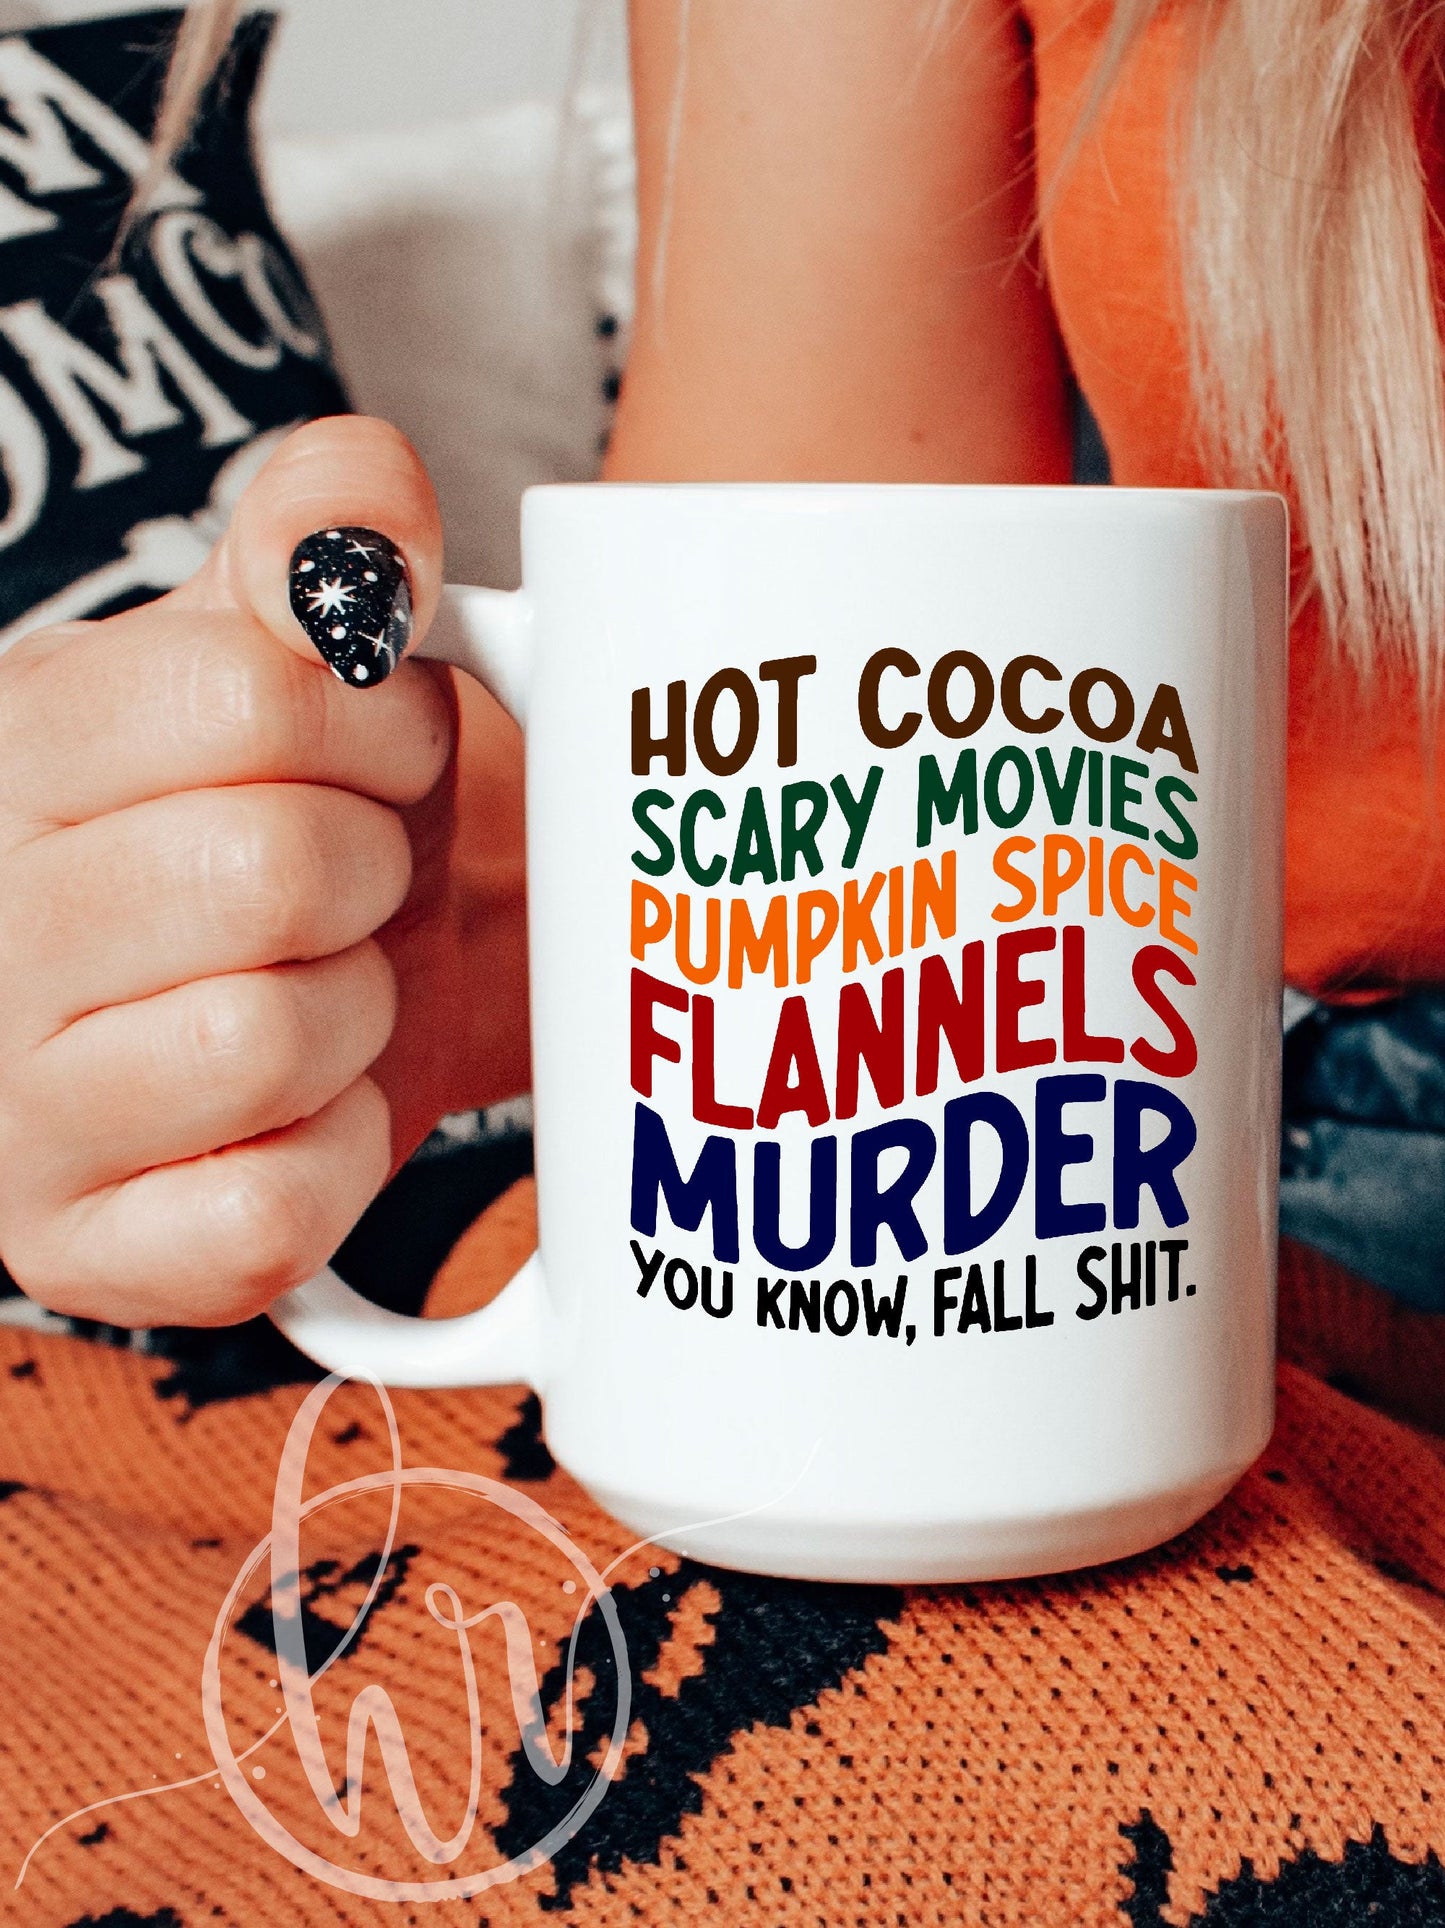 Hot Cocoa Scary Movies Pumpkin Spice Flannels Murder You know, Fall Sh--. Mug